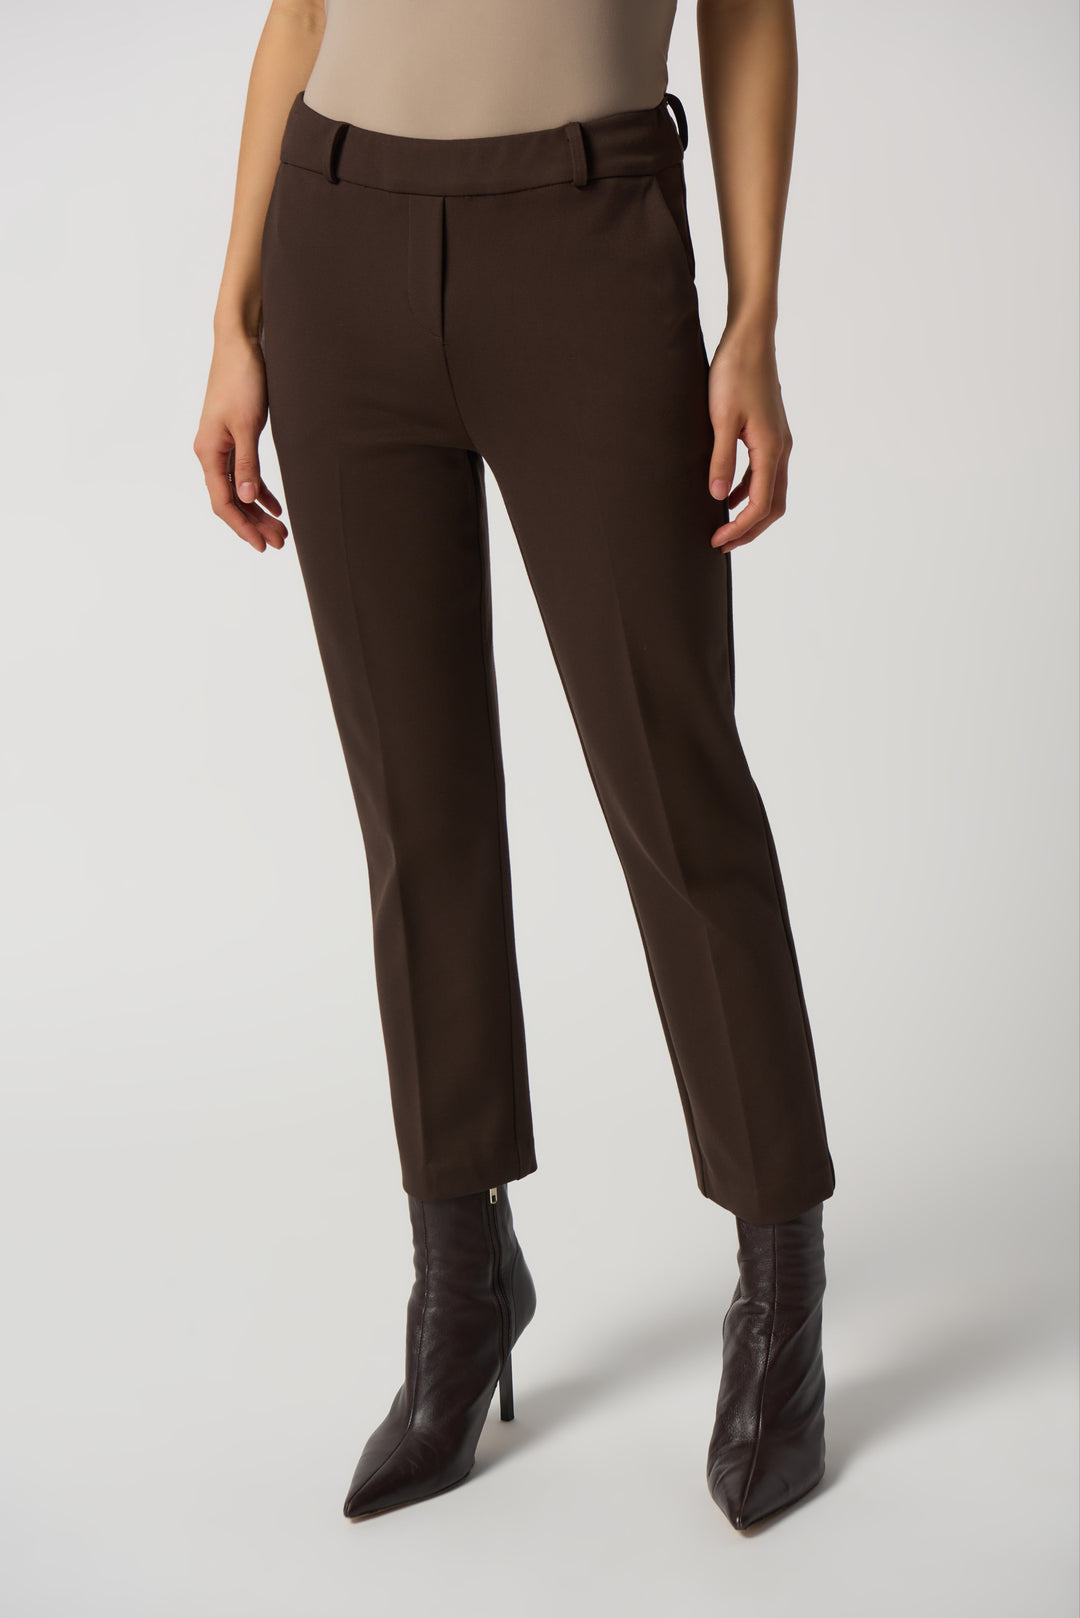 Joseph Ribkoff Fall 2023 women's business casual heavy knit cropped dress pants with pockets - mocha front